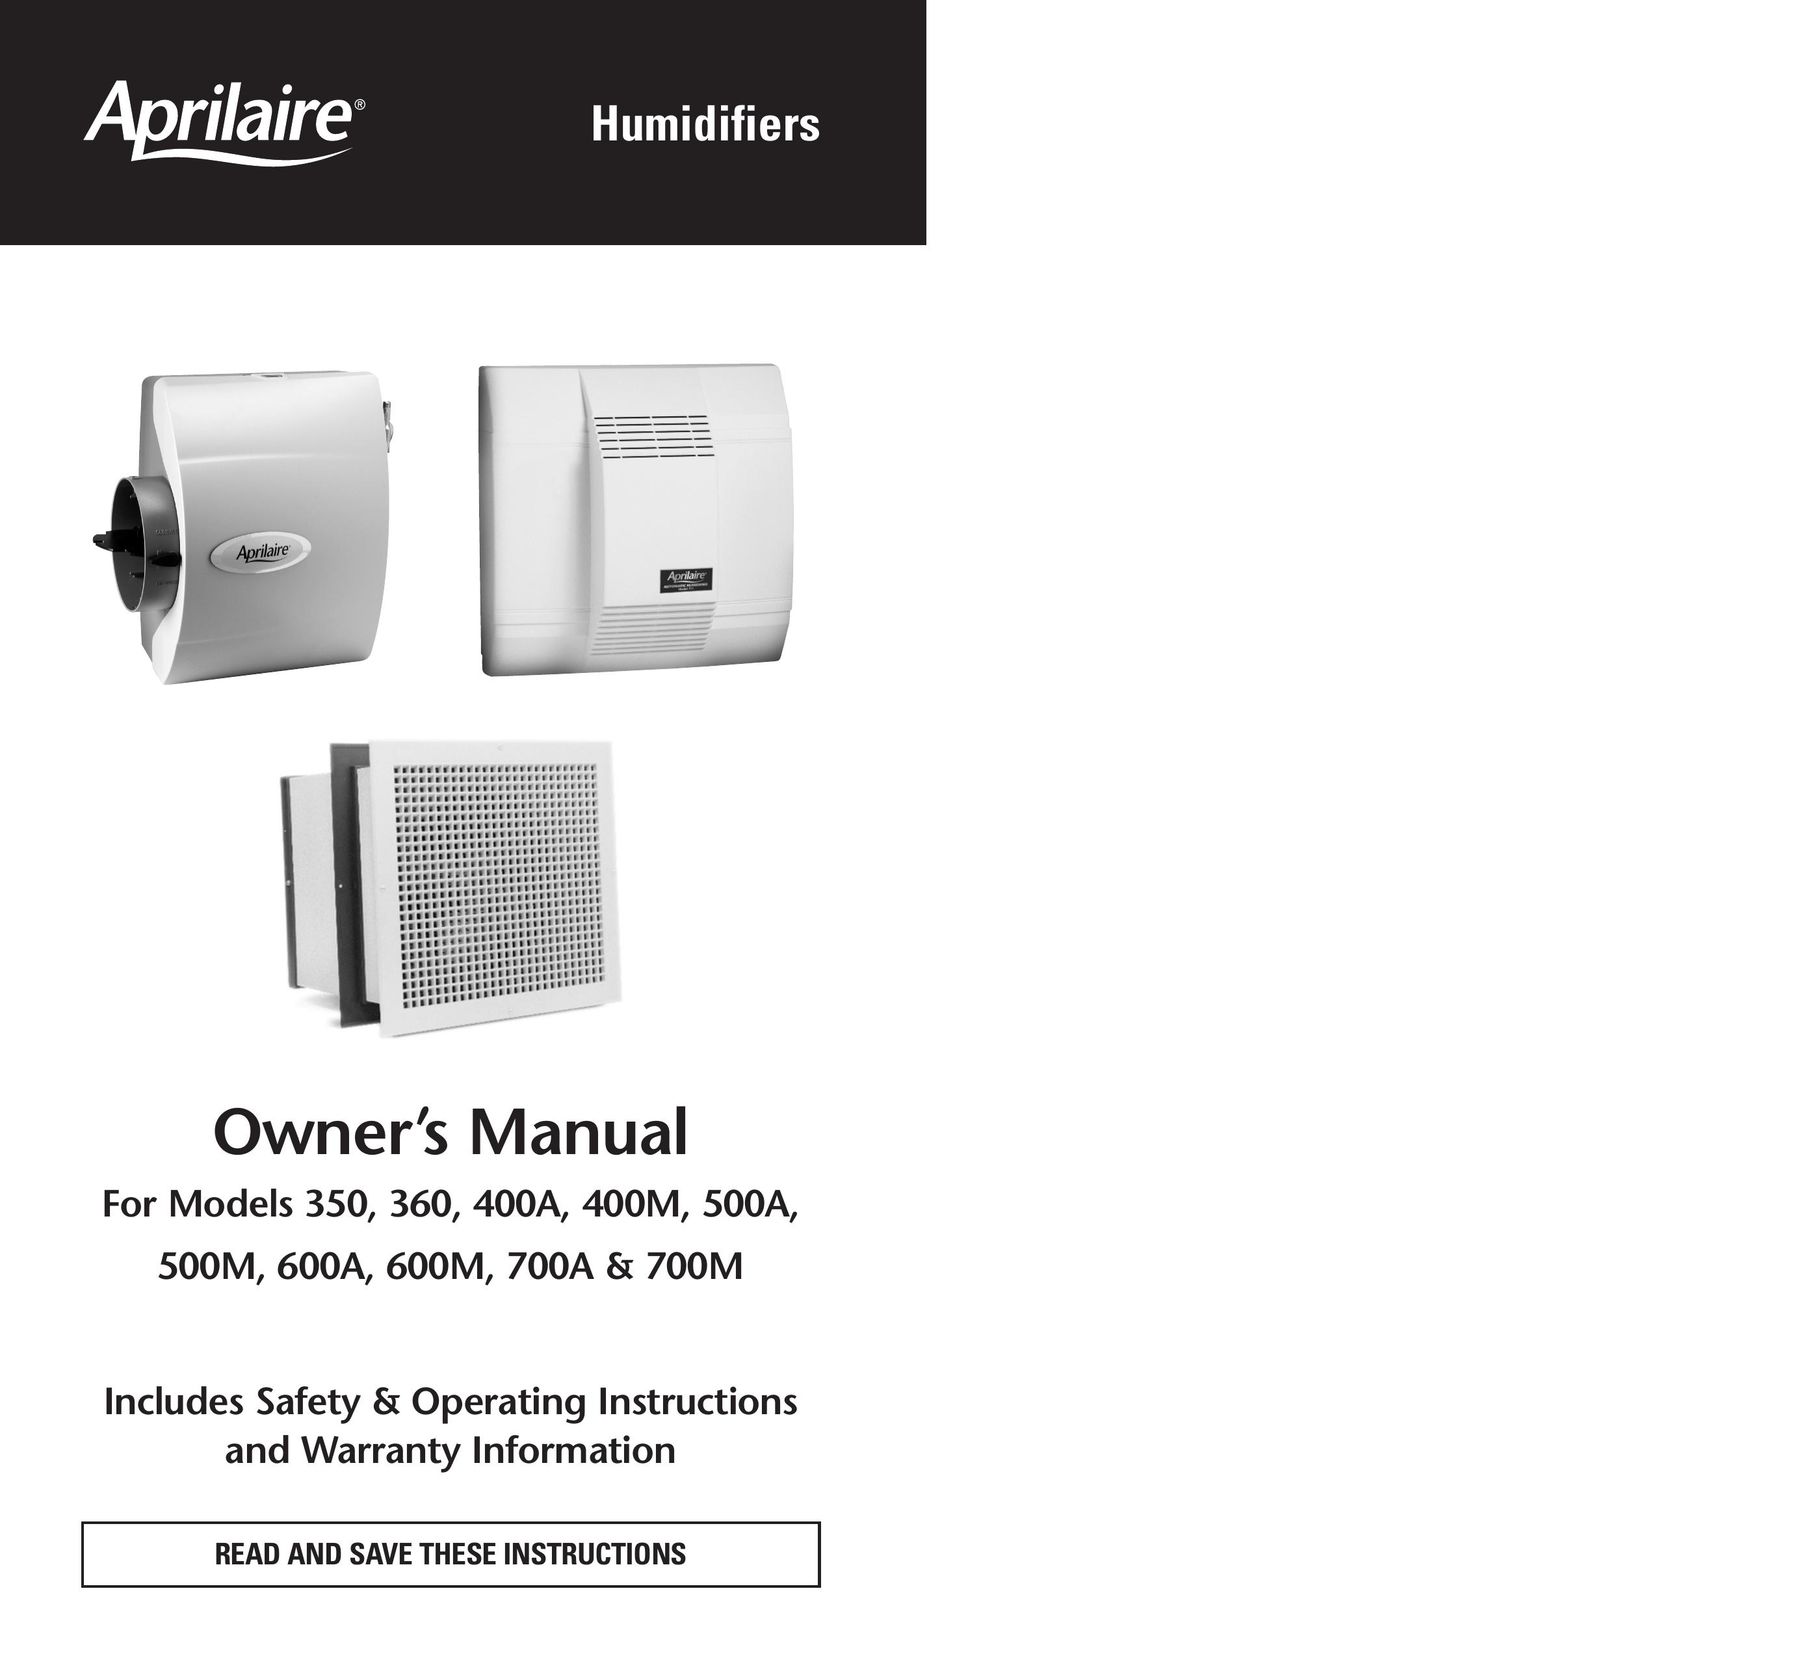 Aprilaire 500A Humidifier User Manual